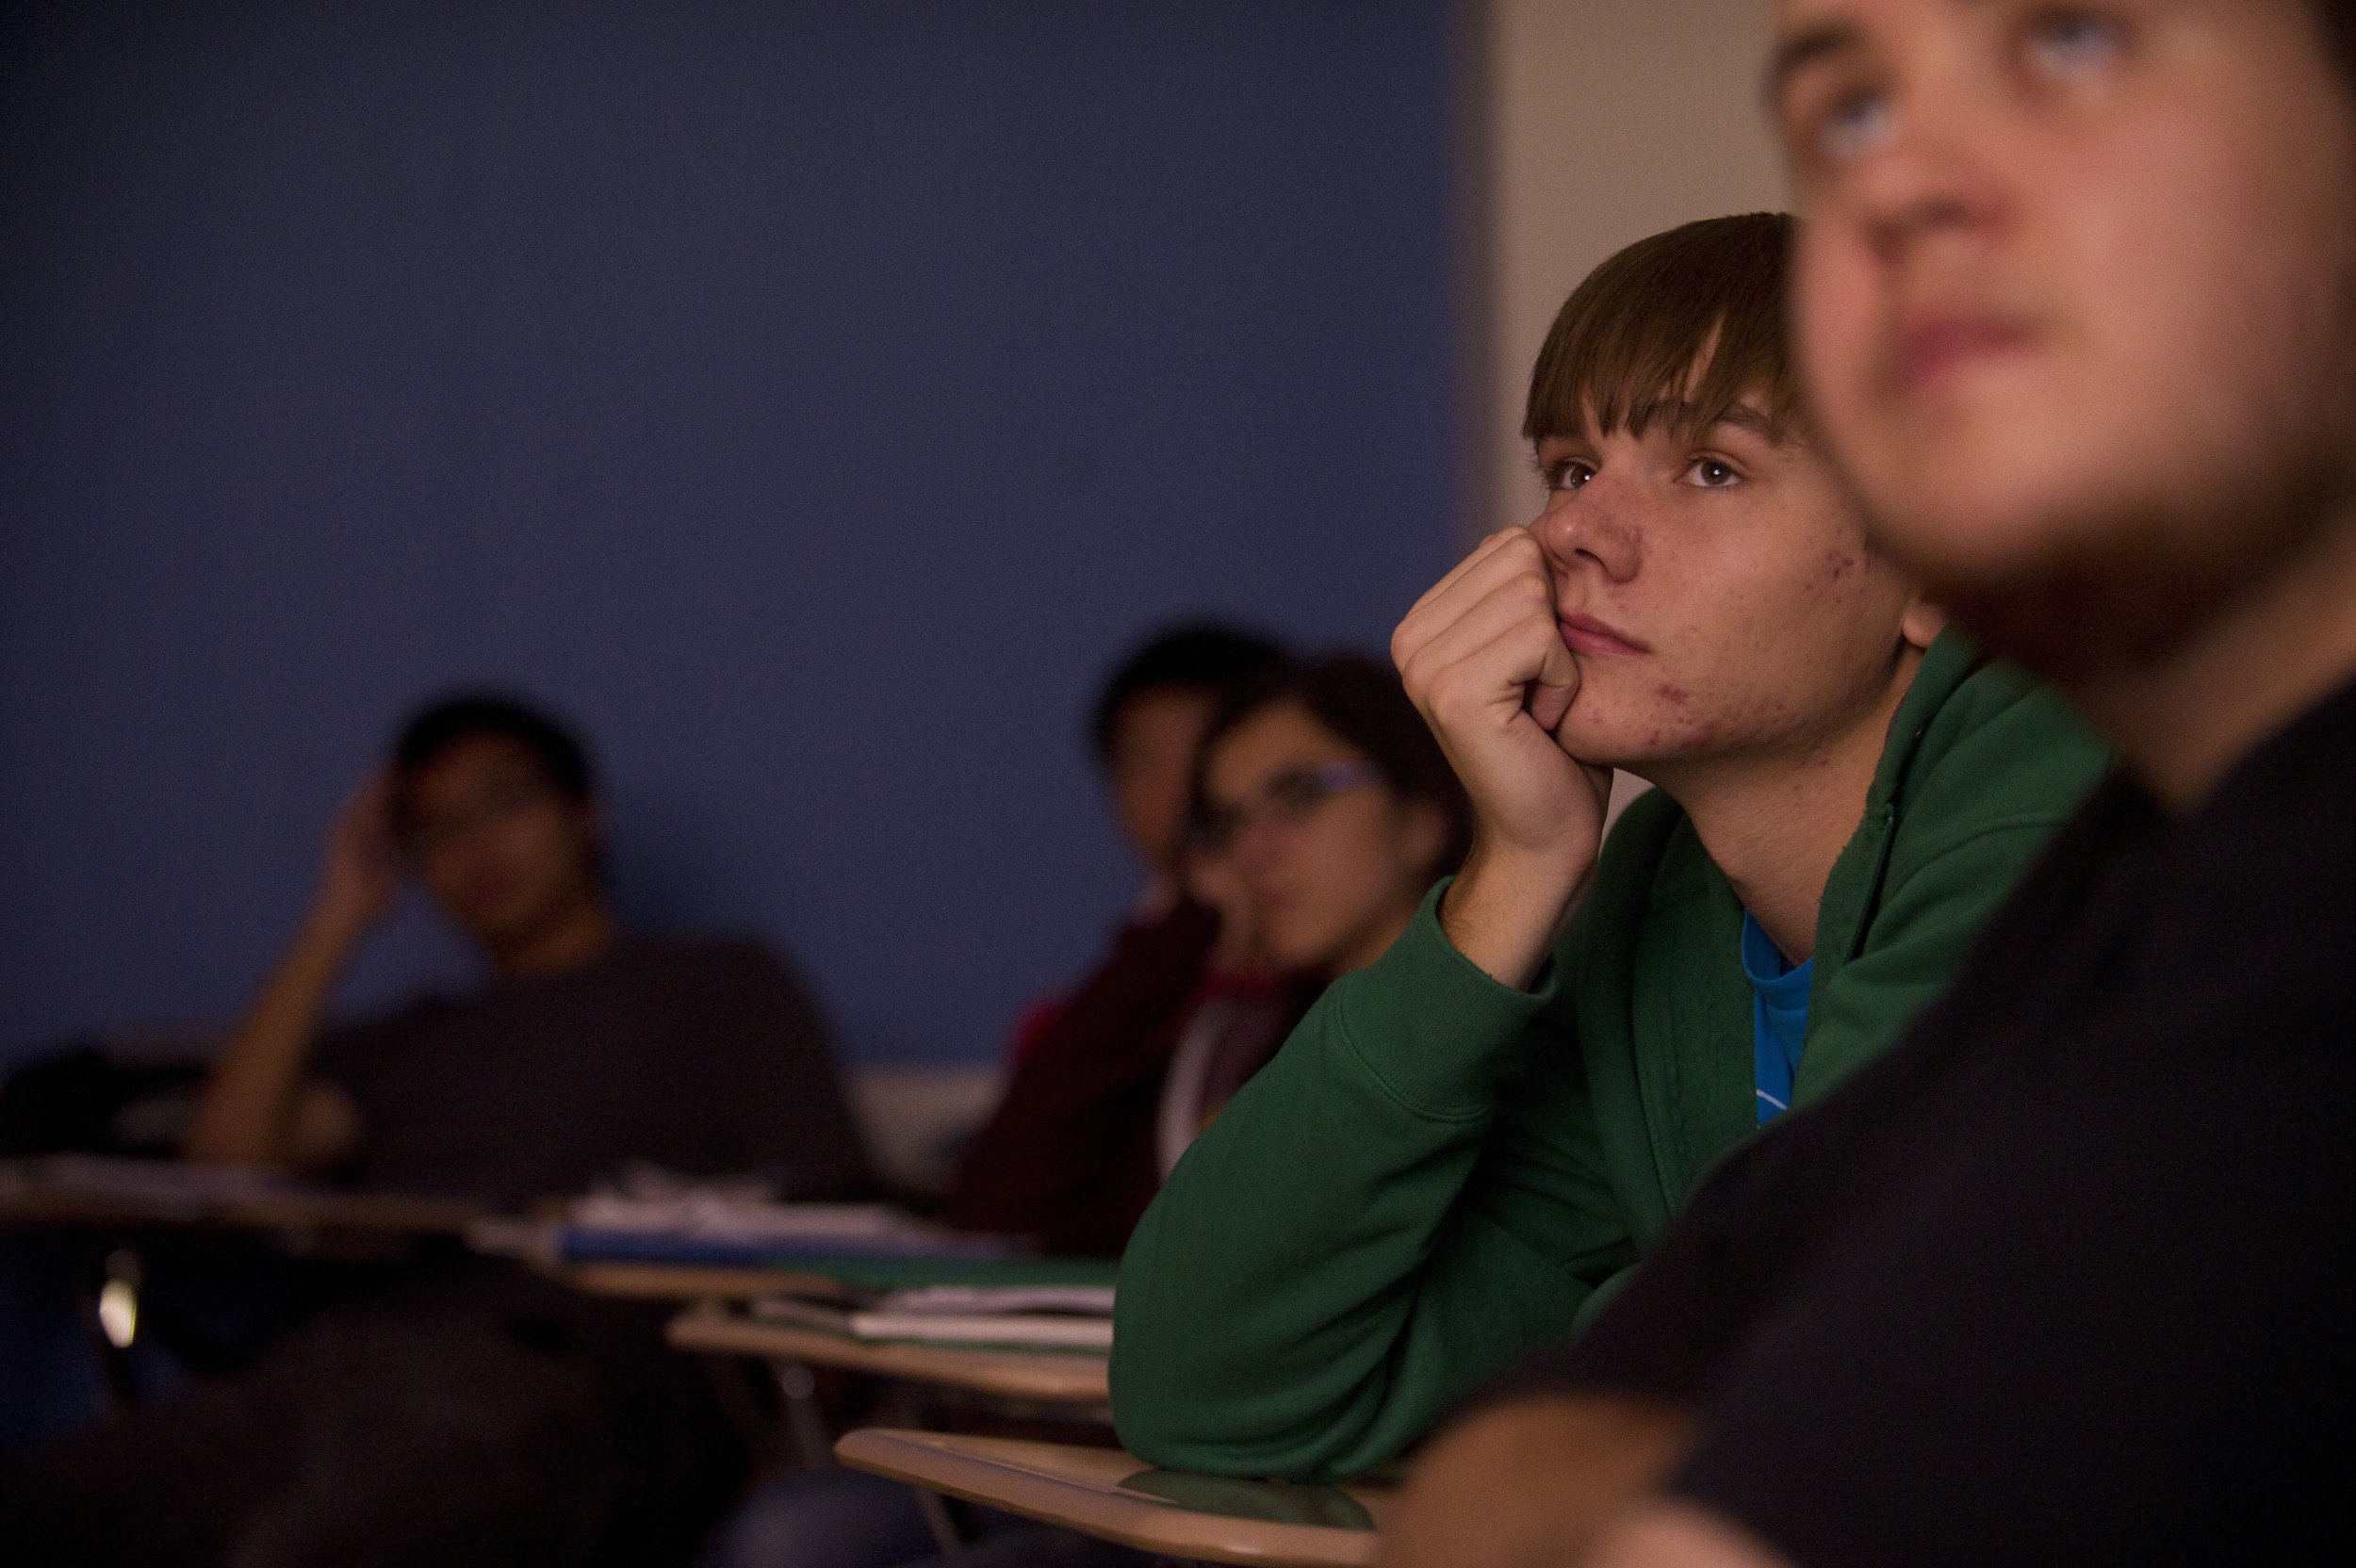  Nathan Hepler (ENG,'15) watches an episode of Battlestar Galactica during Joelle Renstrom's Evolution of Science Fiction class.&nbsp;Photo by Cydney Scott for Boston University Photography 